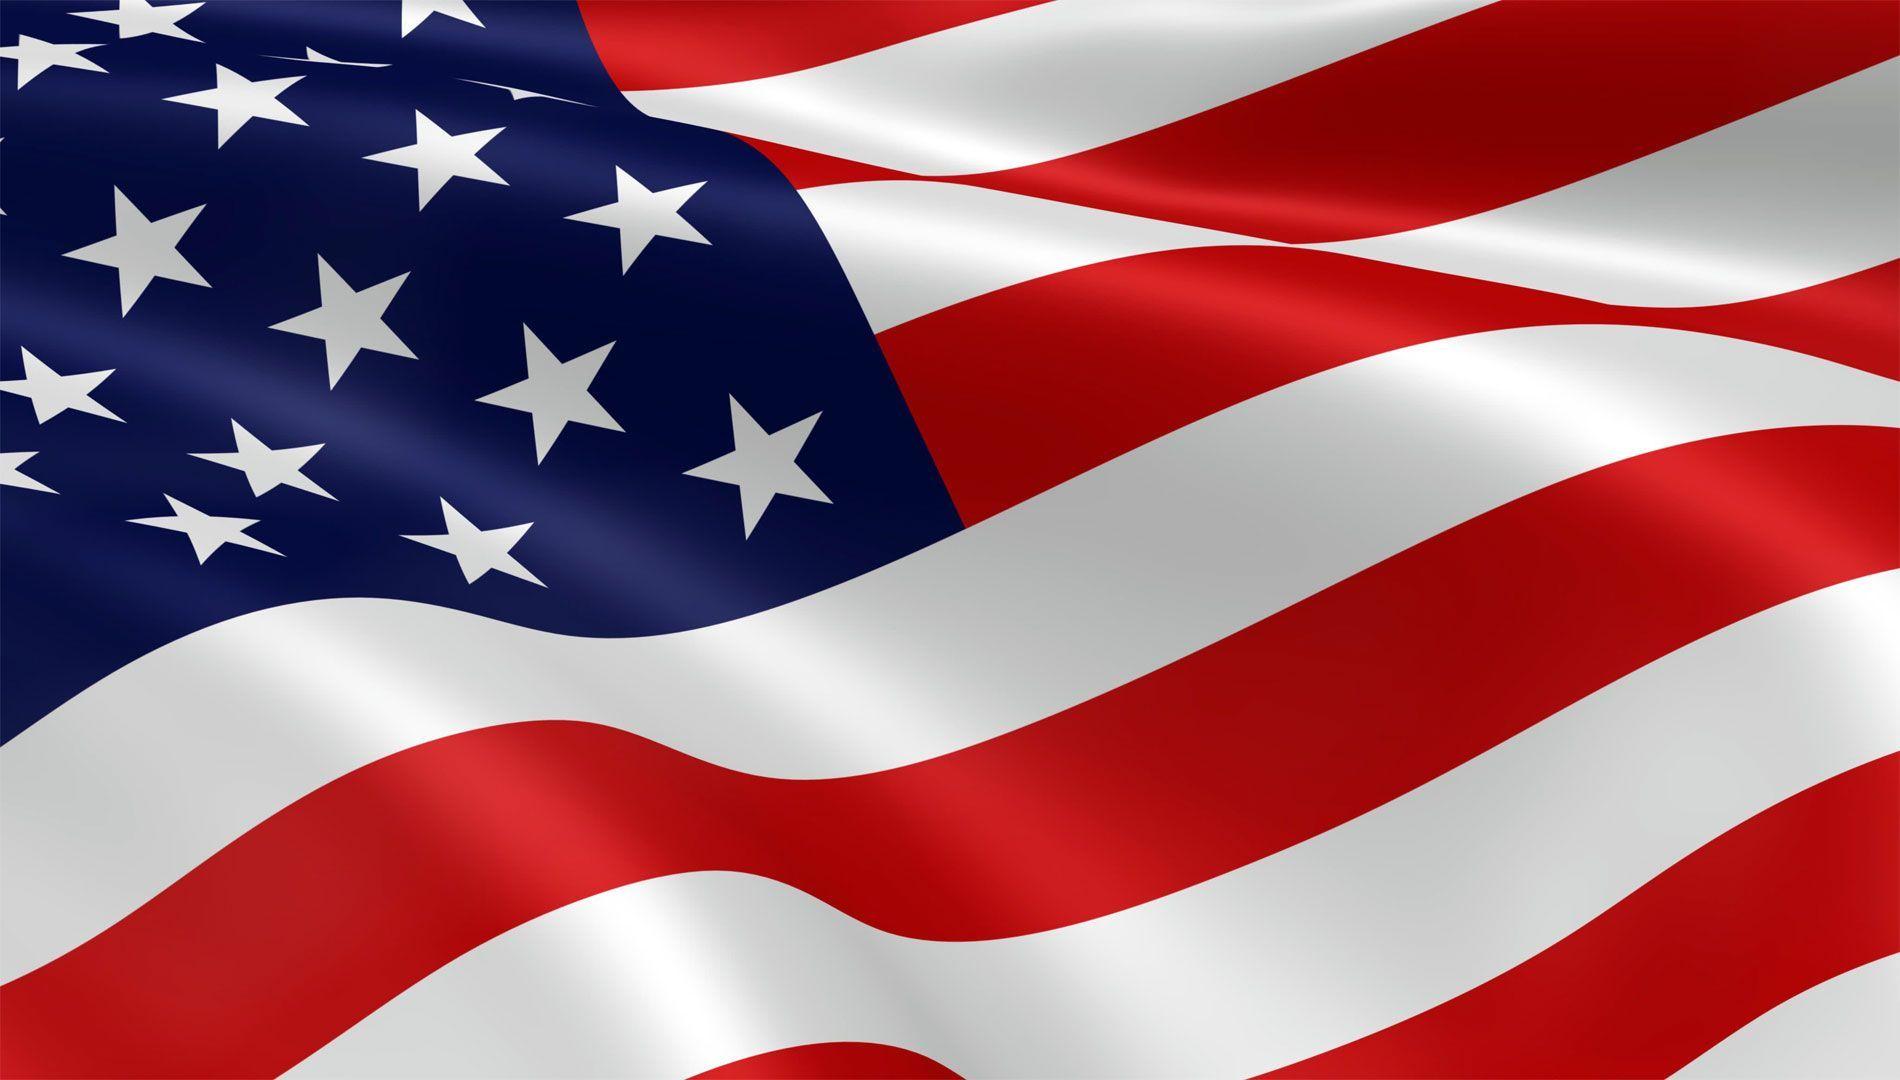 American Flag HD Image and Wallpaper Free Download. Events